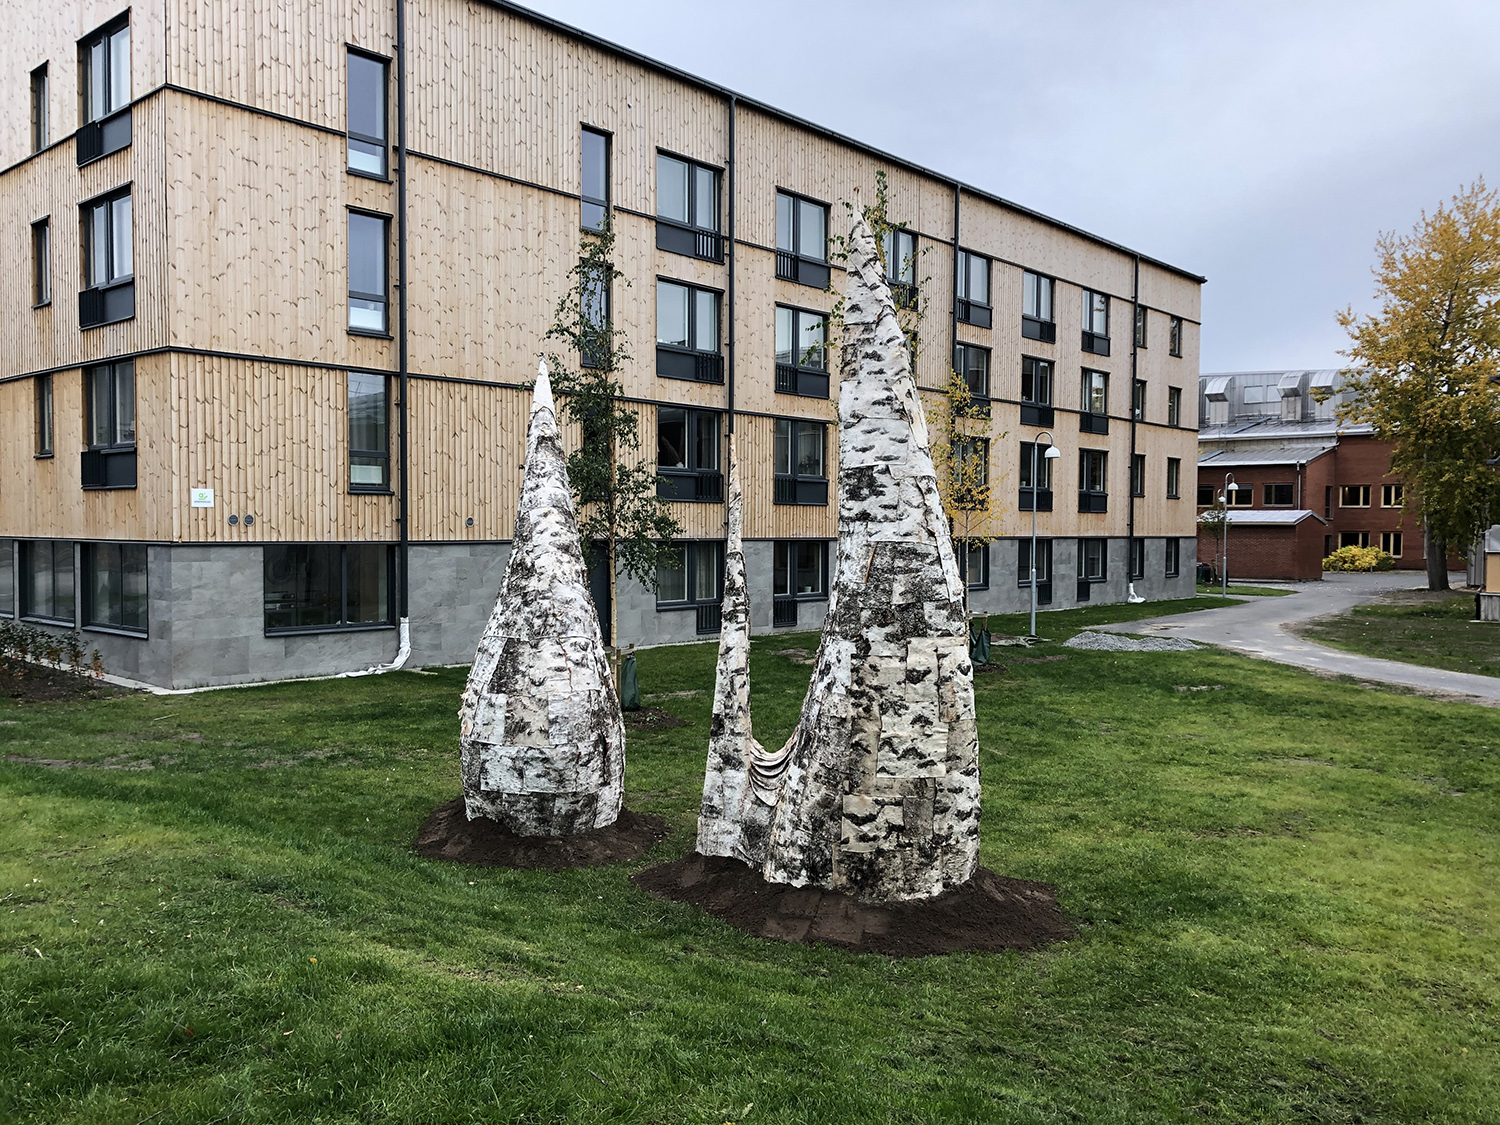 Sculptures made out of birch bark on a green lawn. There's a low building in the background.